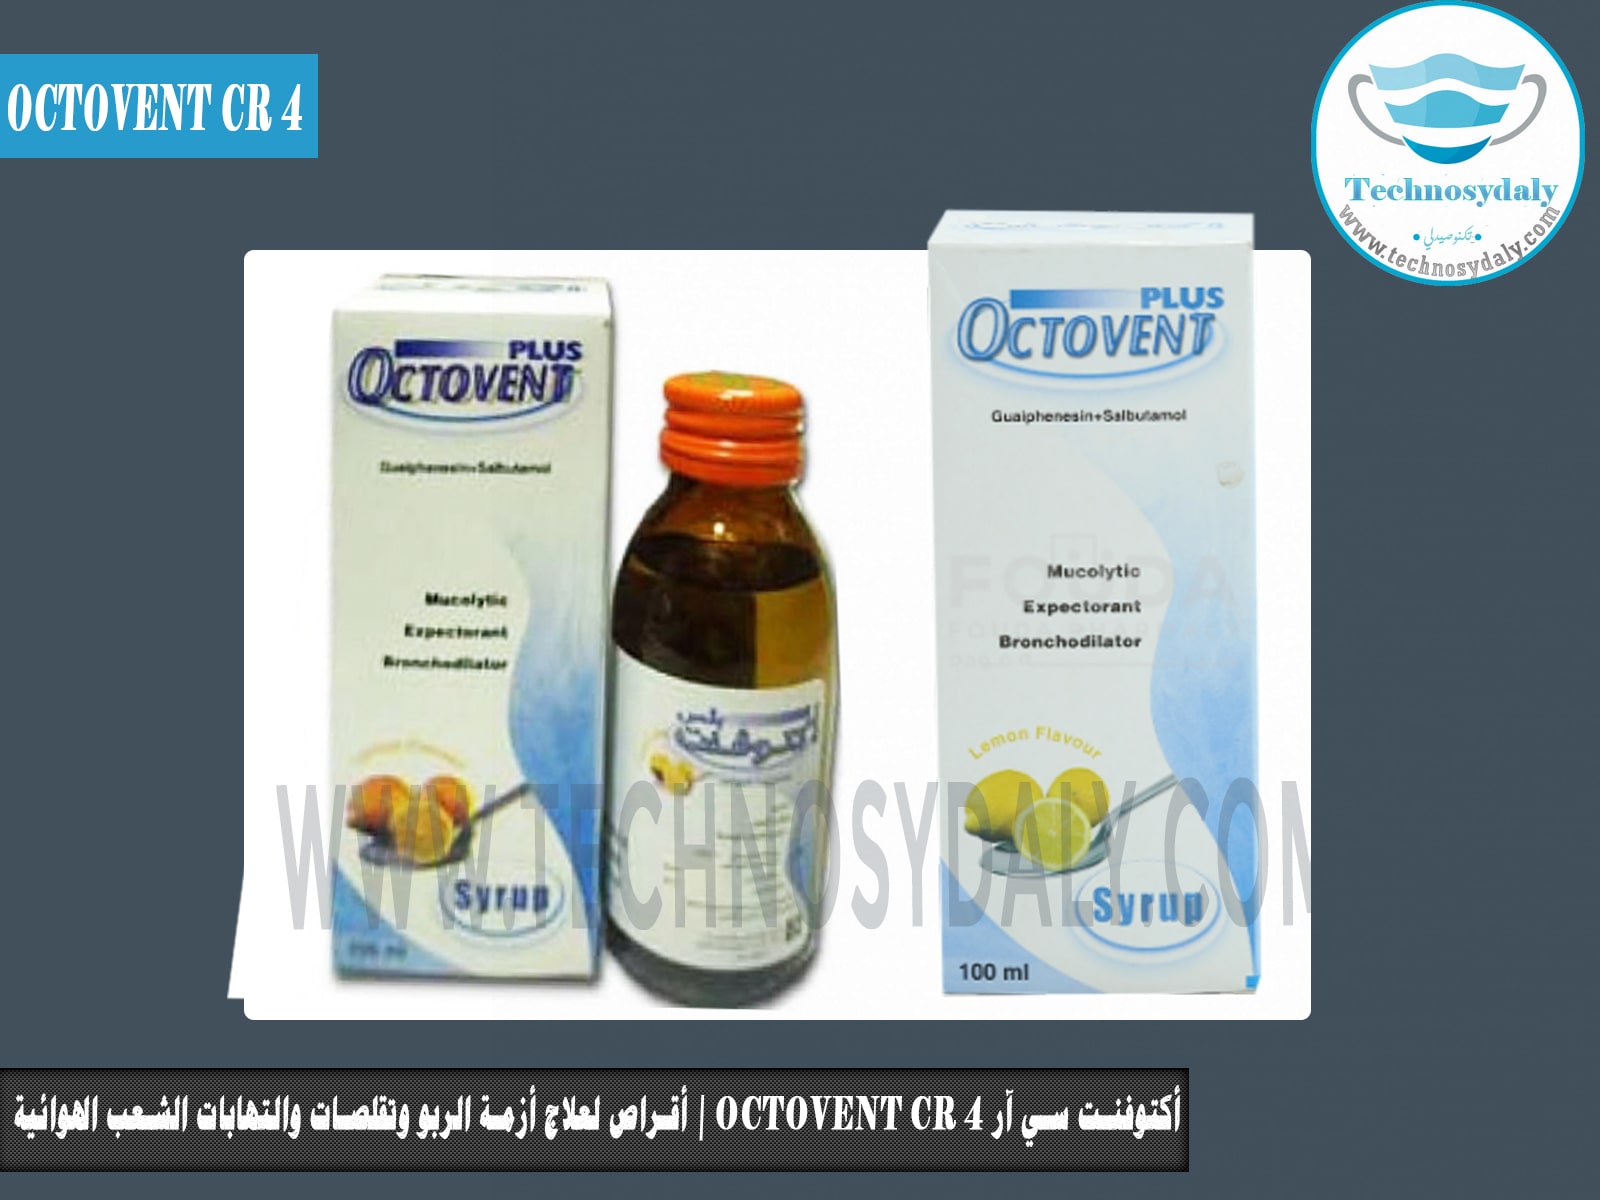 octovent plus syrup 100 ml اكتوفنت بلس شراب